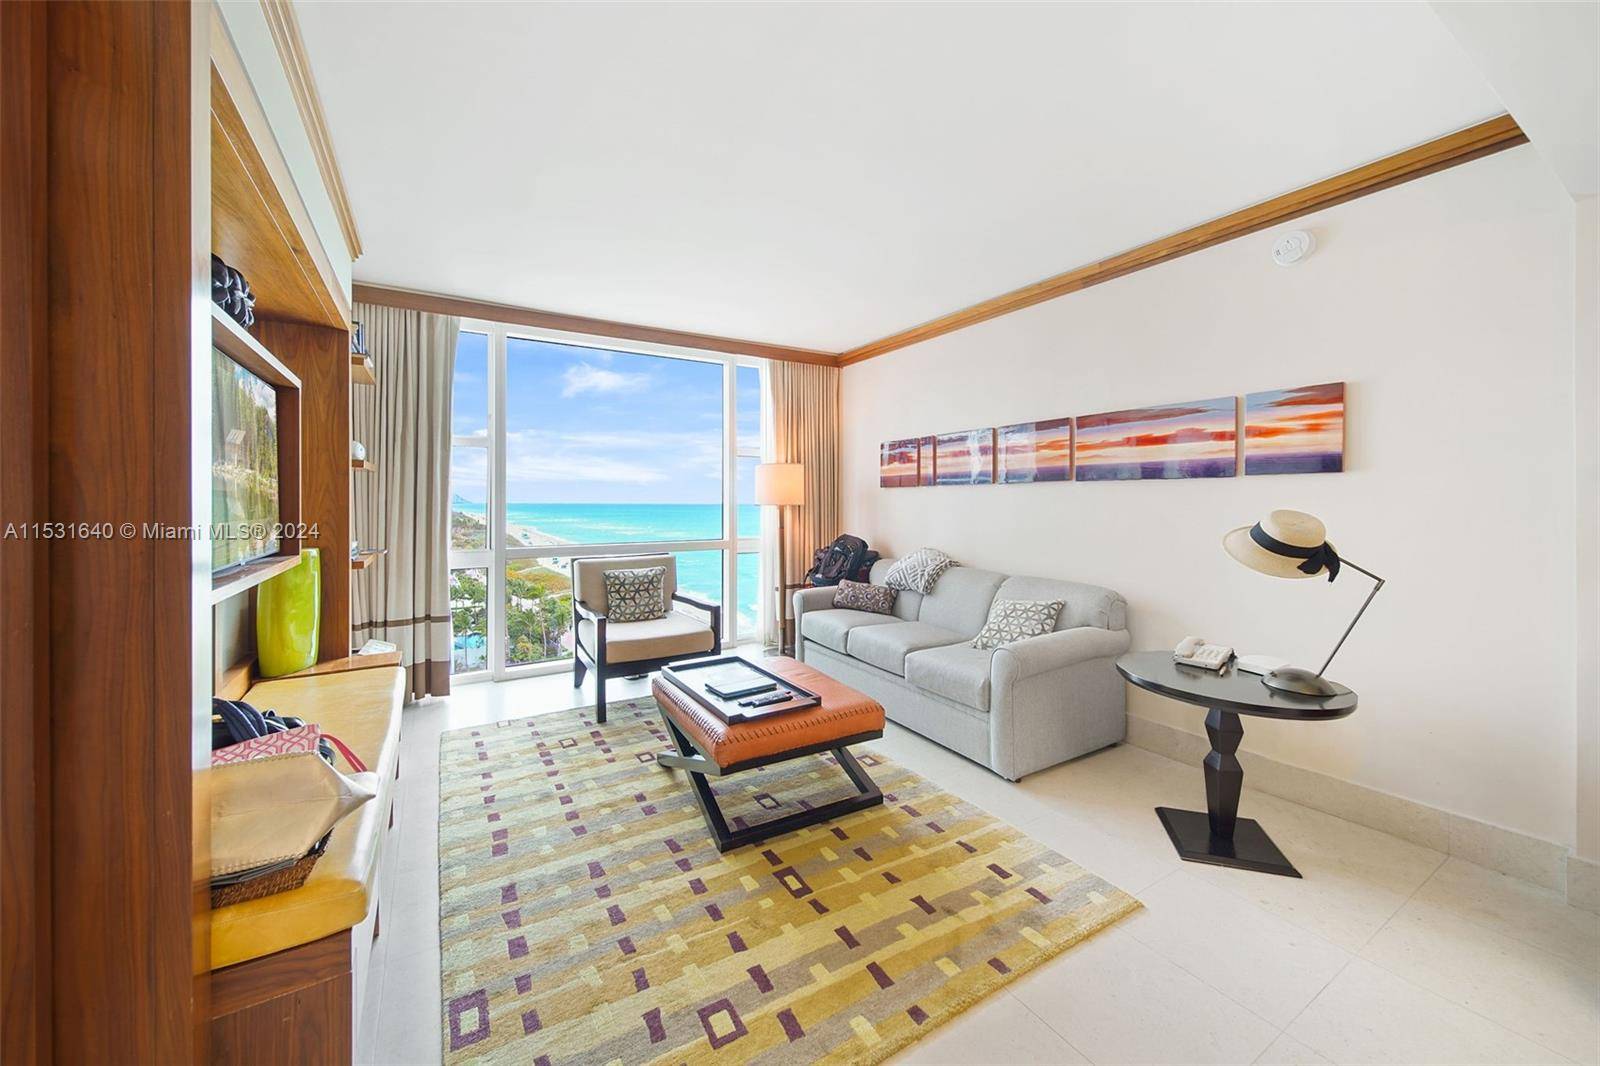 Stunning ocean beach view hotel suite turn key unit at Carillon Miami Wellness Resort, a premier oceanfront luxury property.